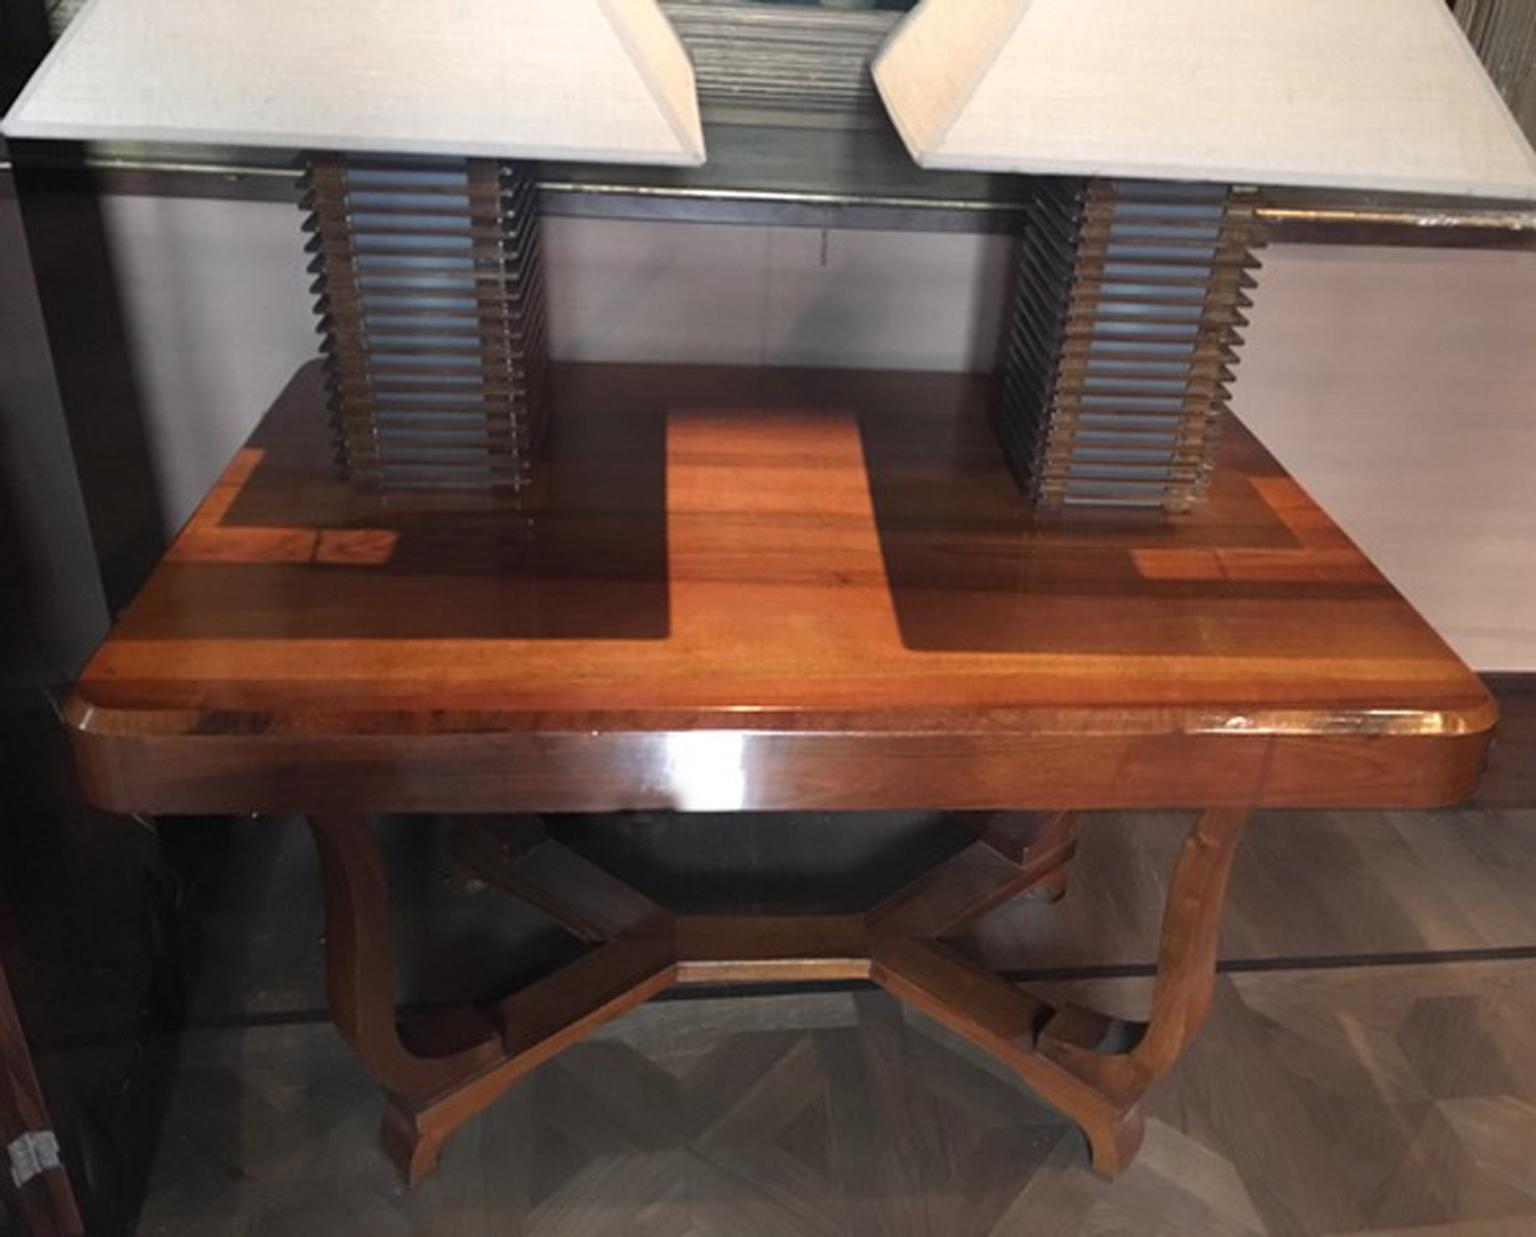 This is an elegant and a stunning  table that was hand made in Italy. It iwas made in 1930 and it is an original Deco piece.
The top shows the beauty of the essence of walnut. The four legs are joined with a central crossbar.
It could be useful as